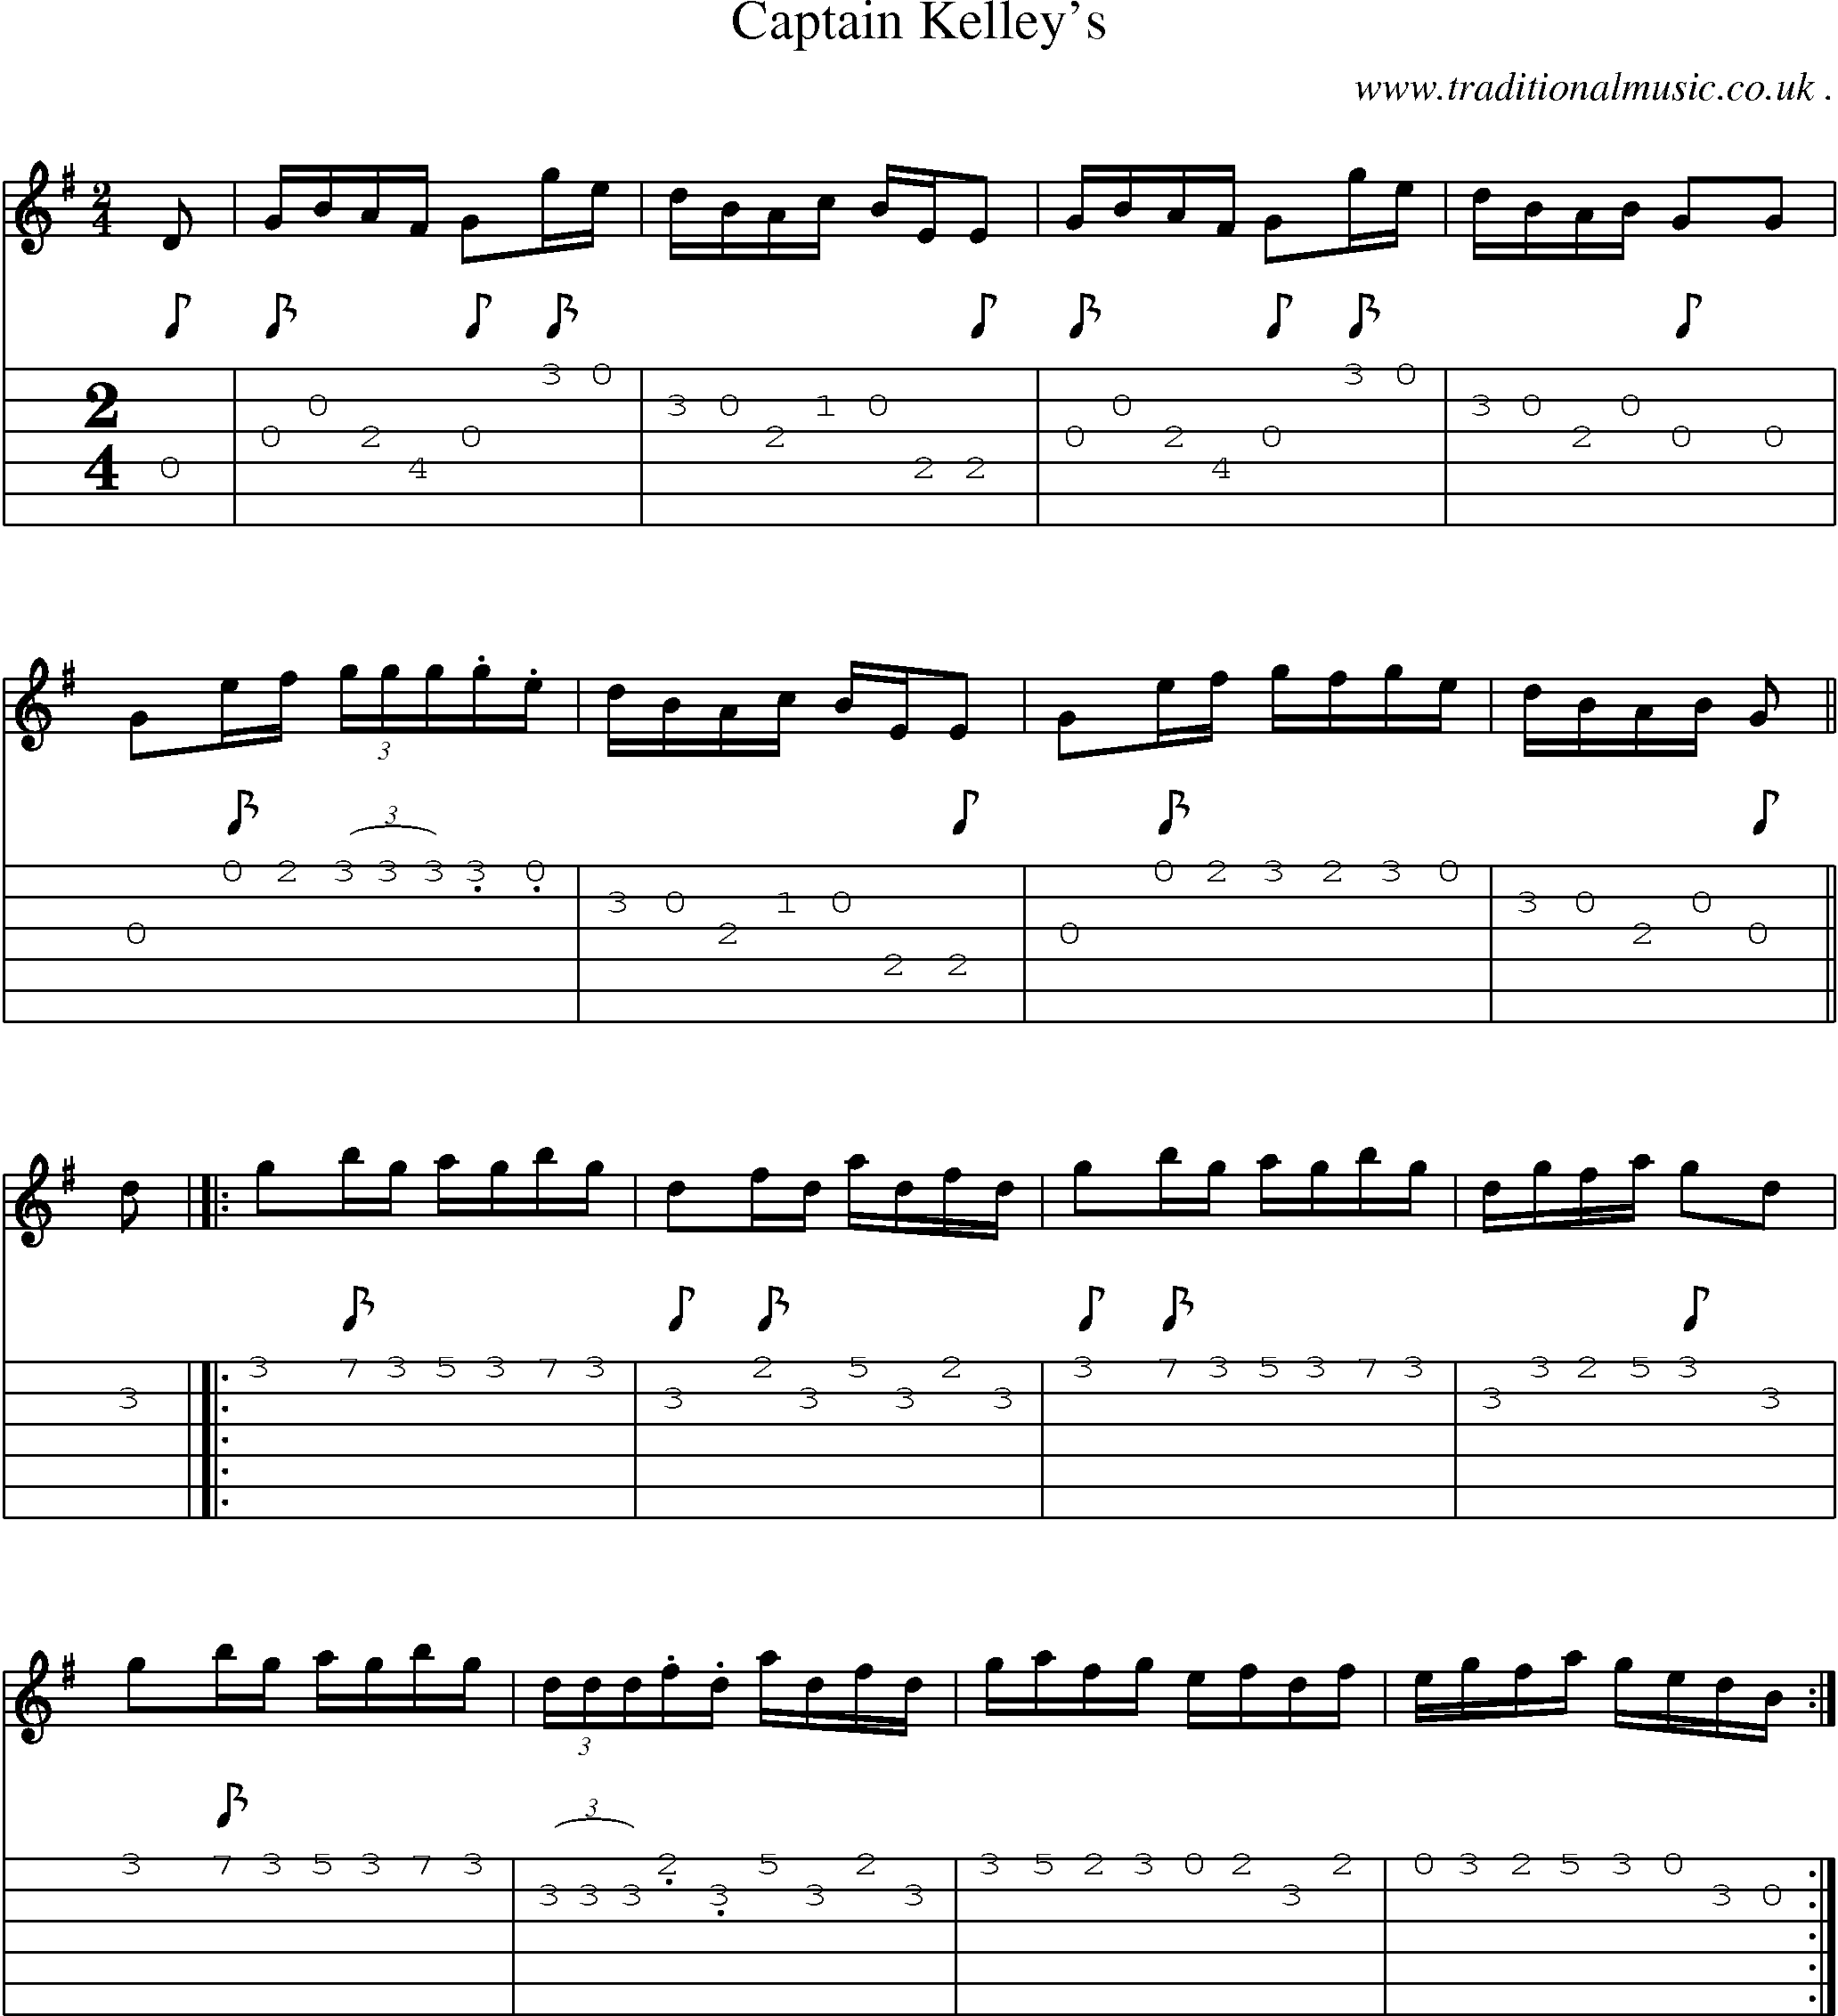 Sheet-Music and Guitar Tabs for Captain Kelleys